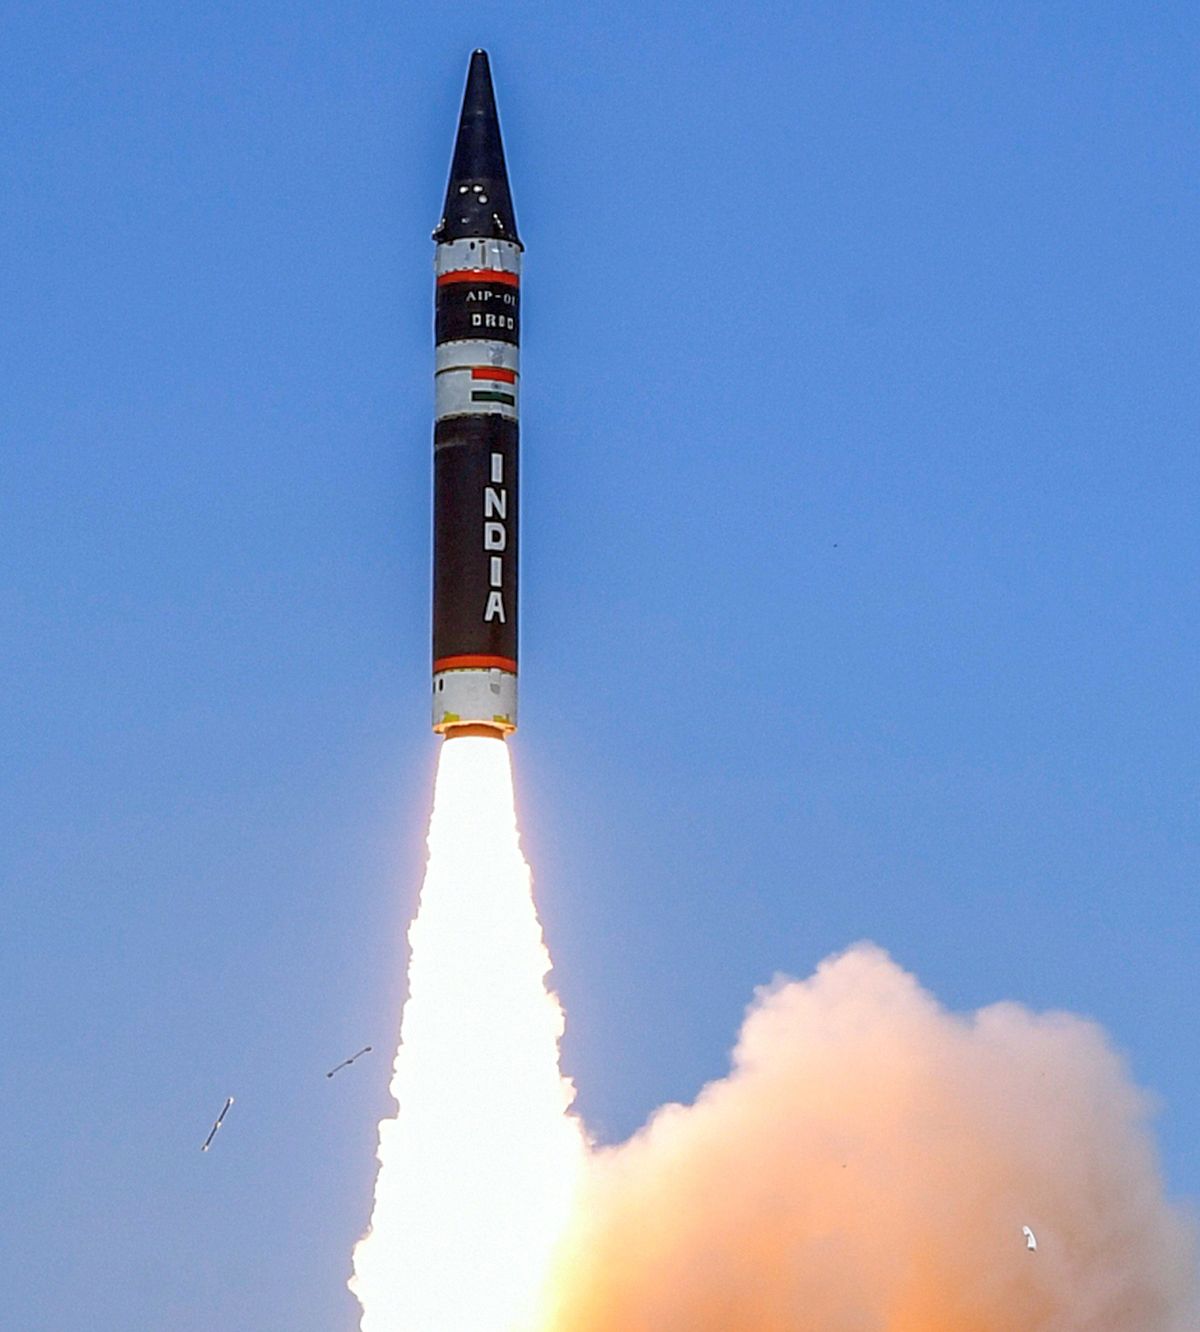 India’s Agni missile now has capability to hit targets beyond 7,000 km